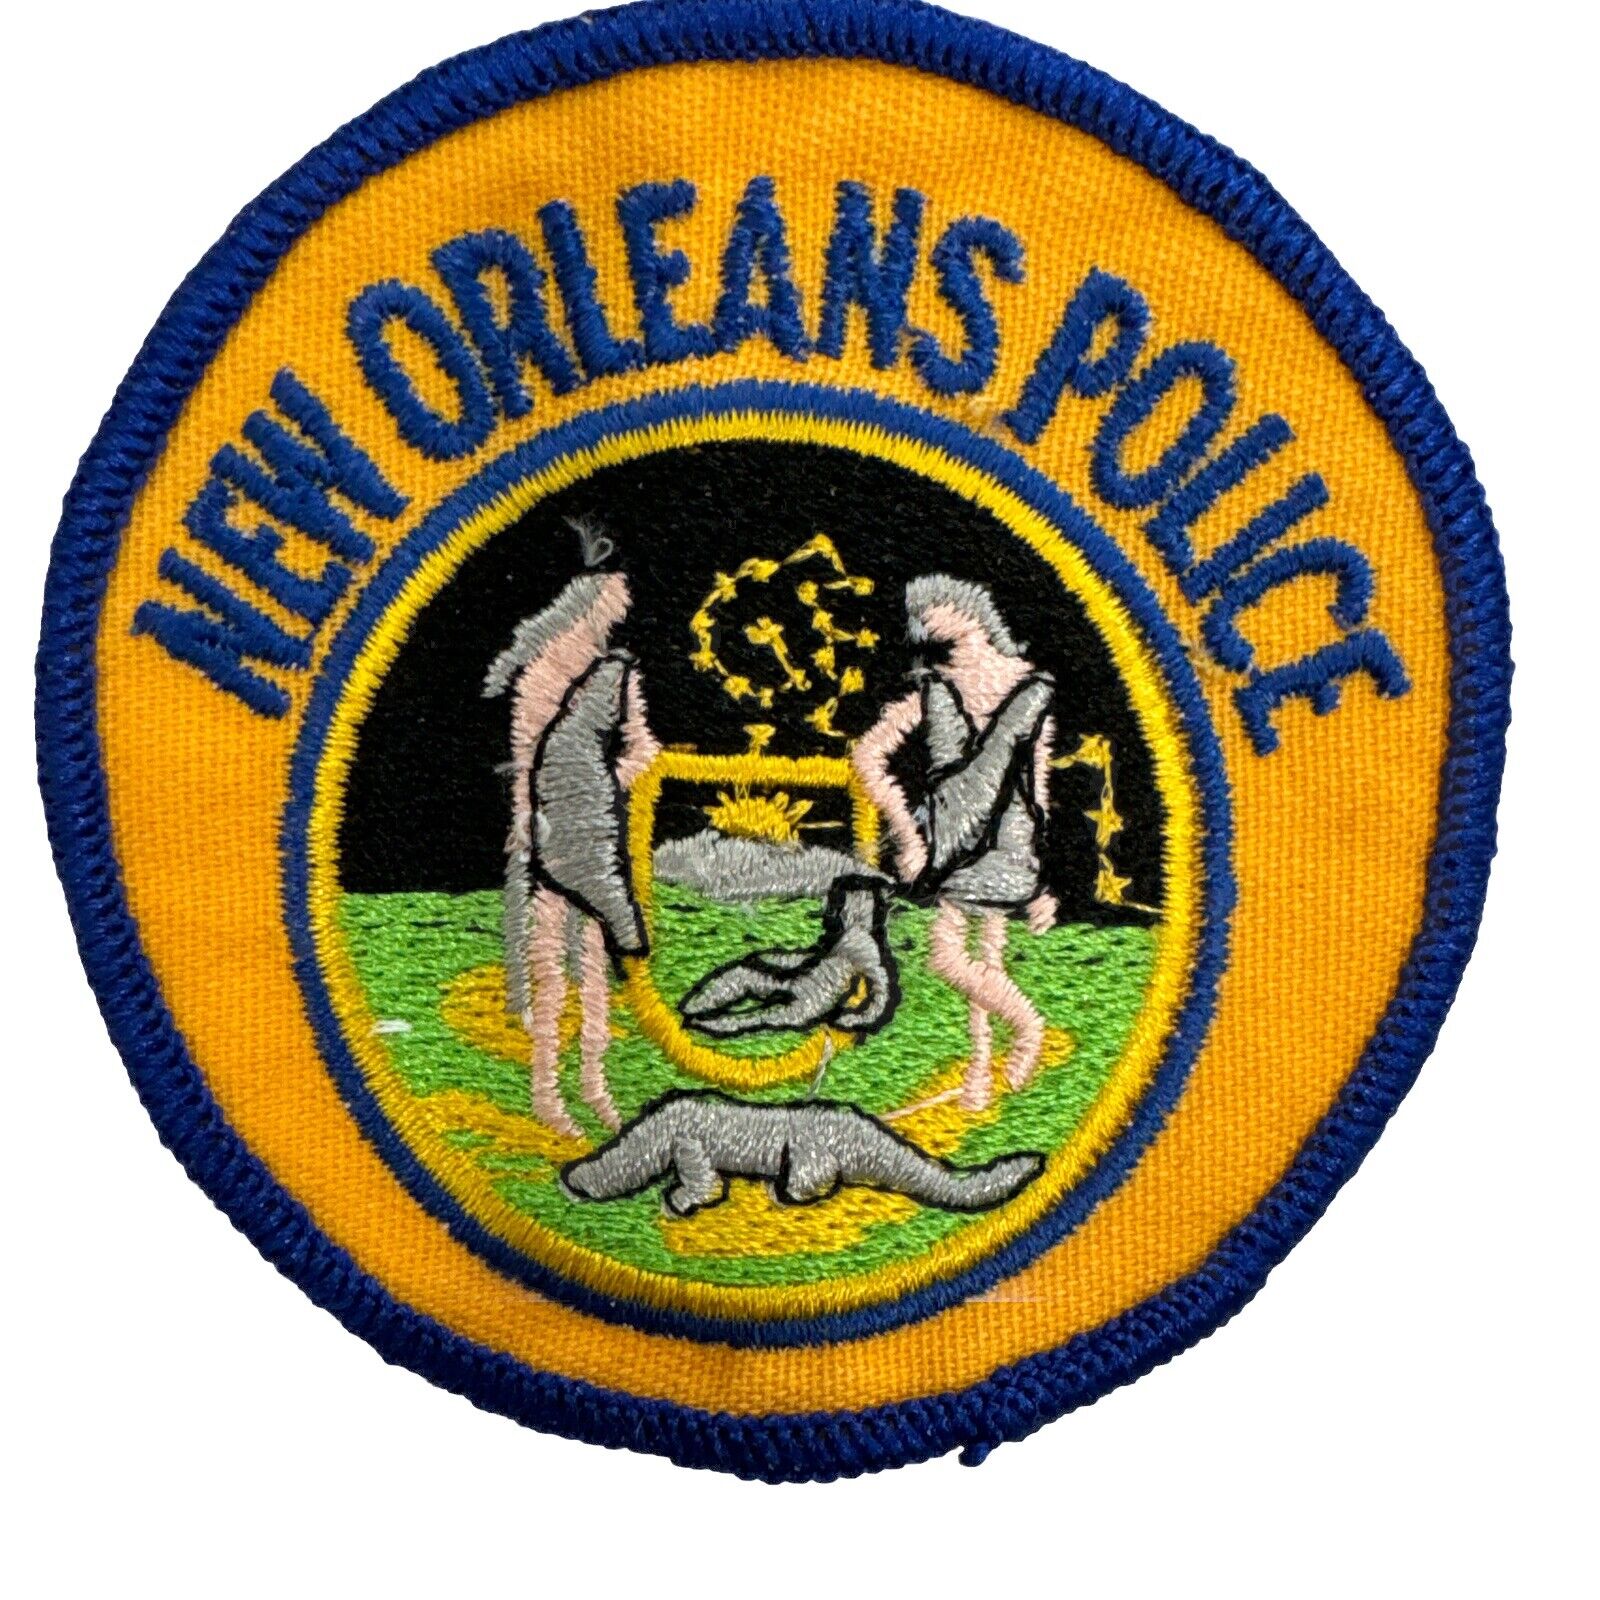 Vintage Louisiana Police Patch New Orleans New Old Stock 3”